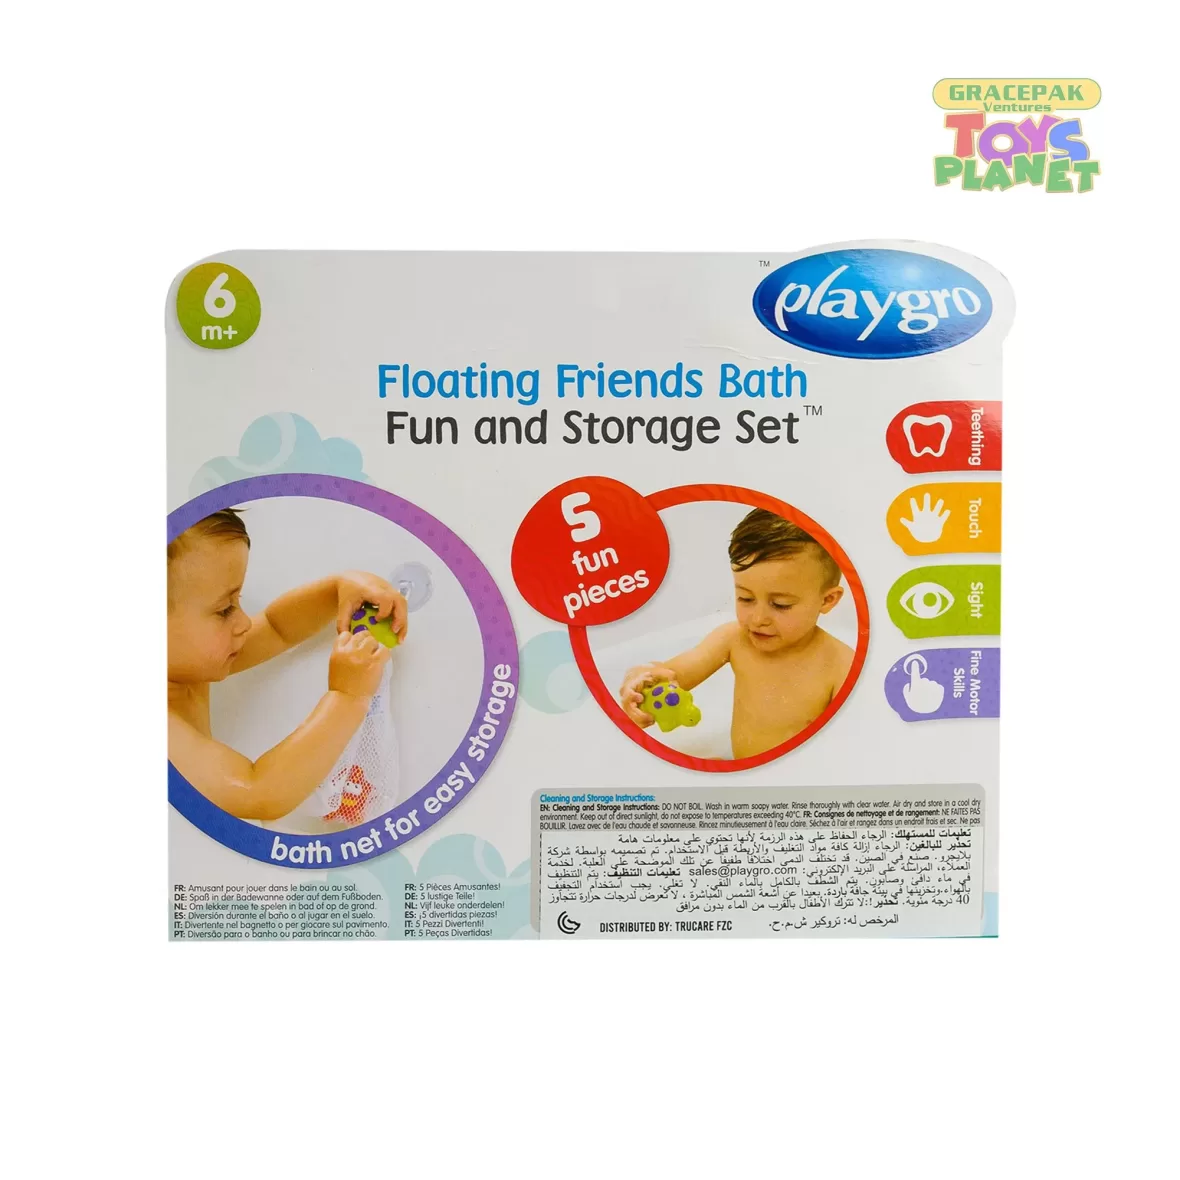 Playgro_Floating Friends Bath Fun and Storage Set – Fully Sealed_2